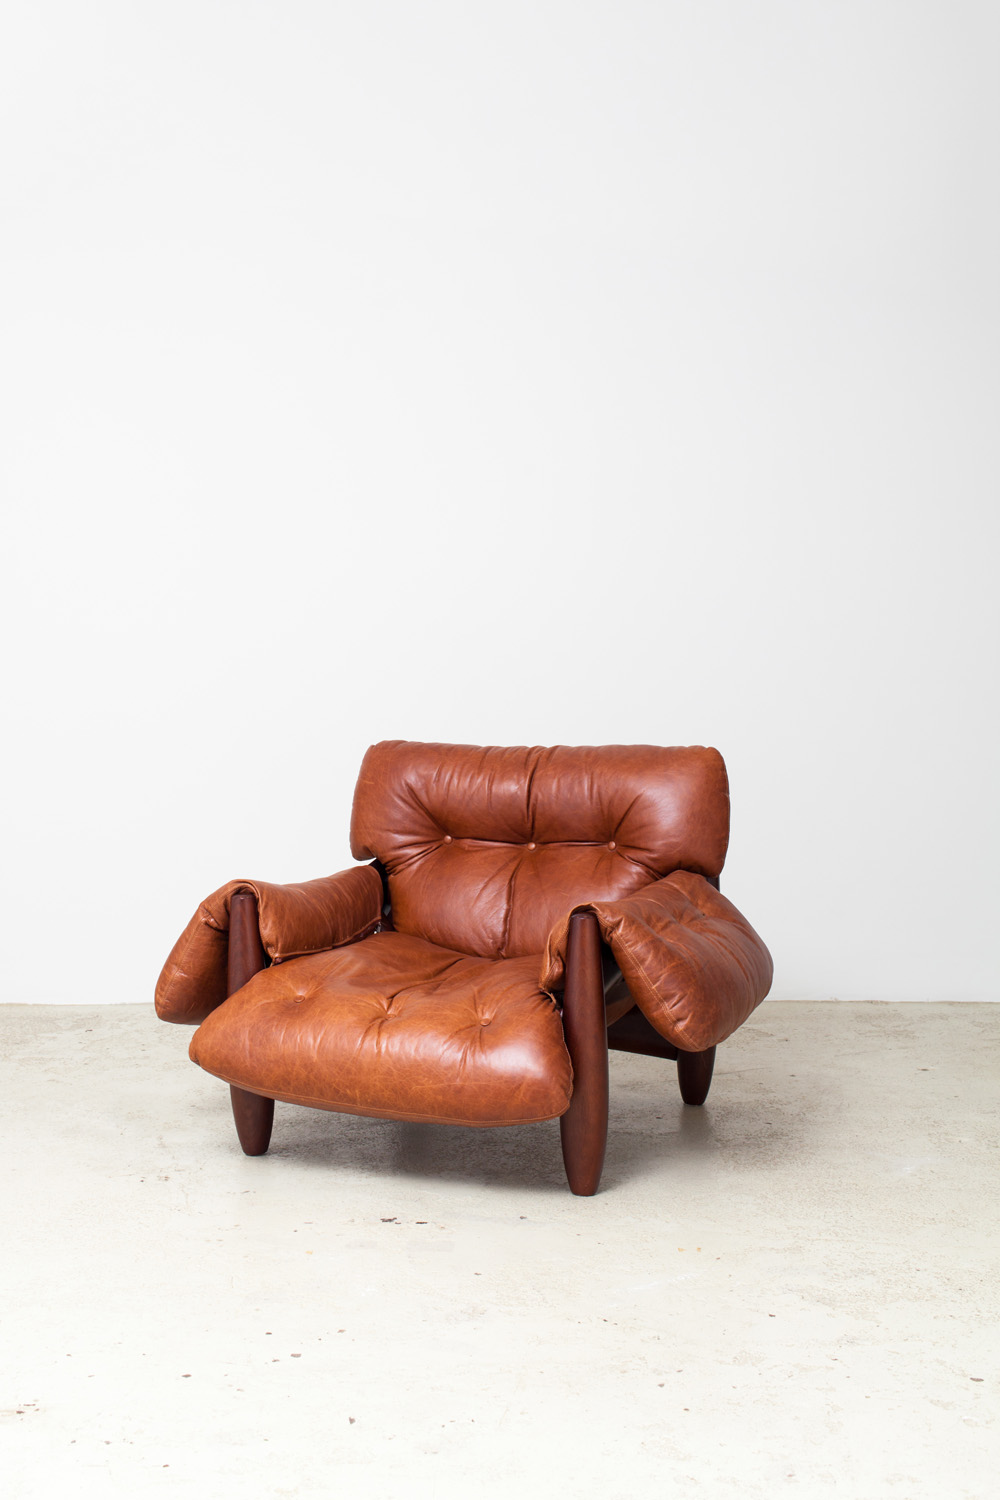 Luxury and artisinal furniture design in London: Armchair by Espasso